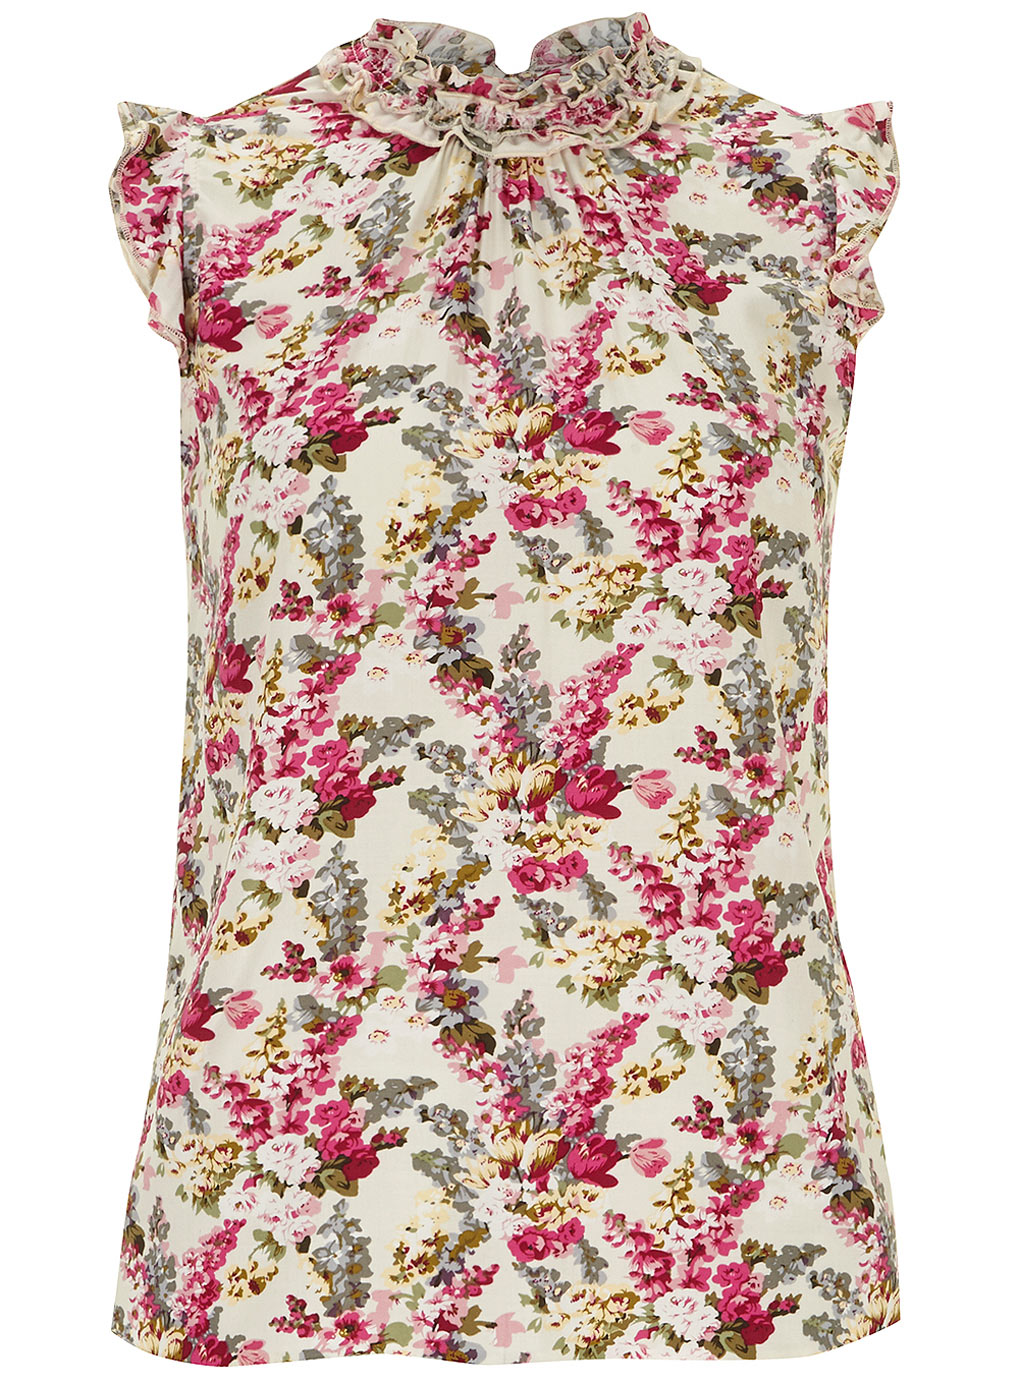 Billie and Blossom Floral frill neck blouse